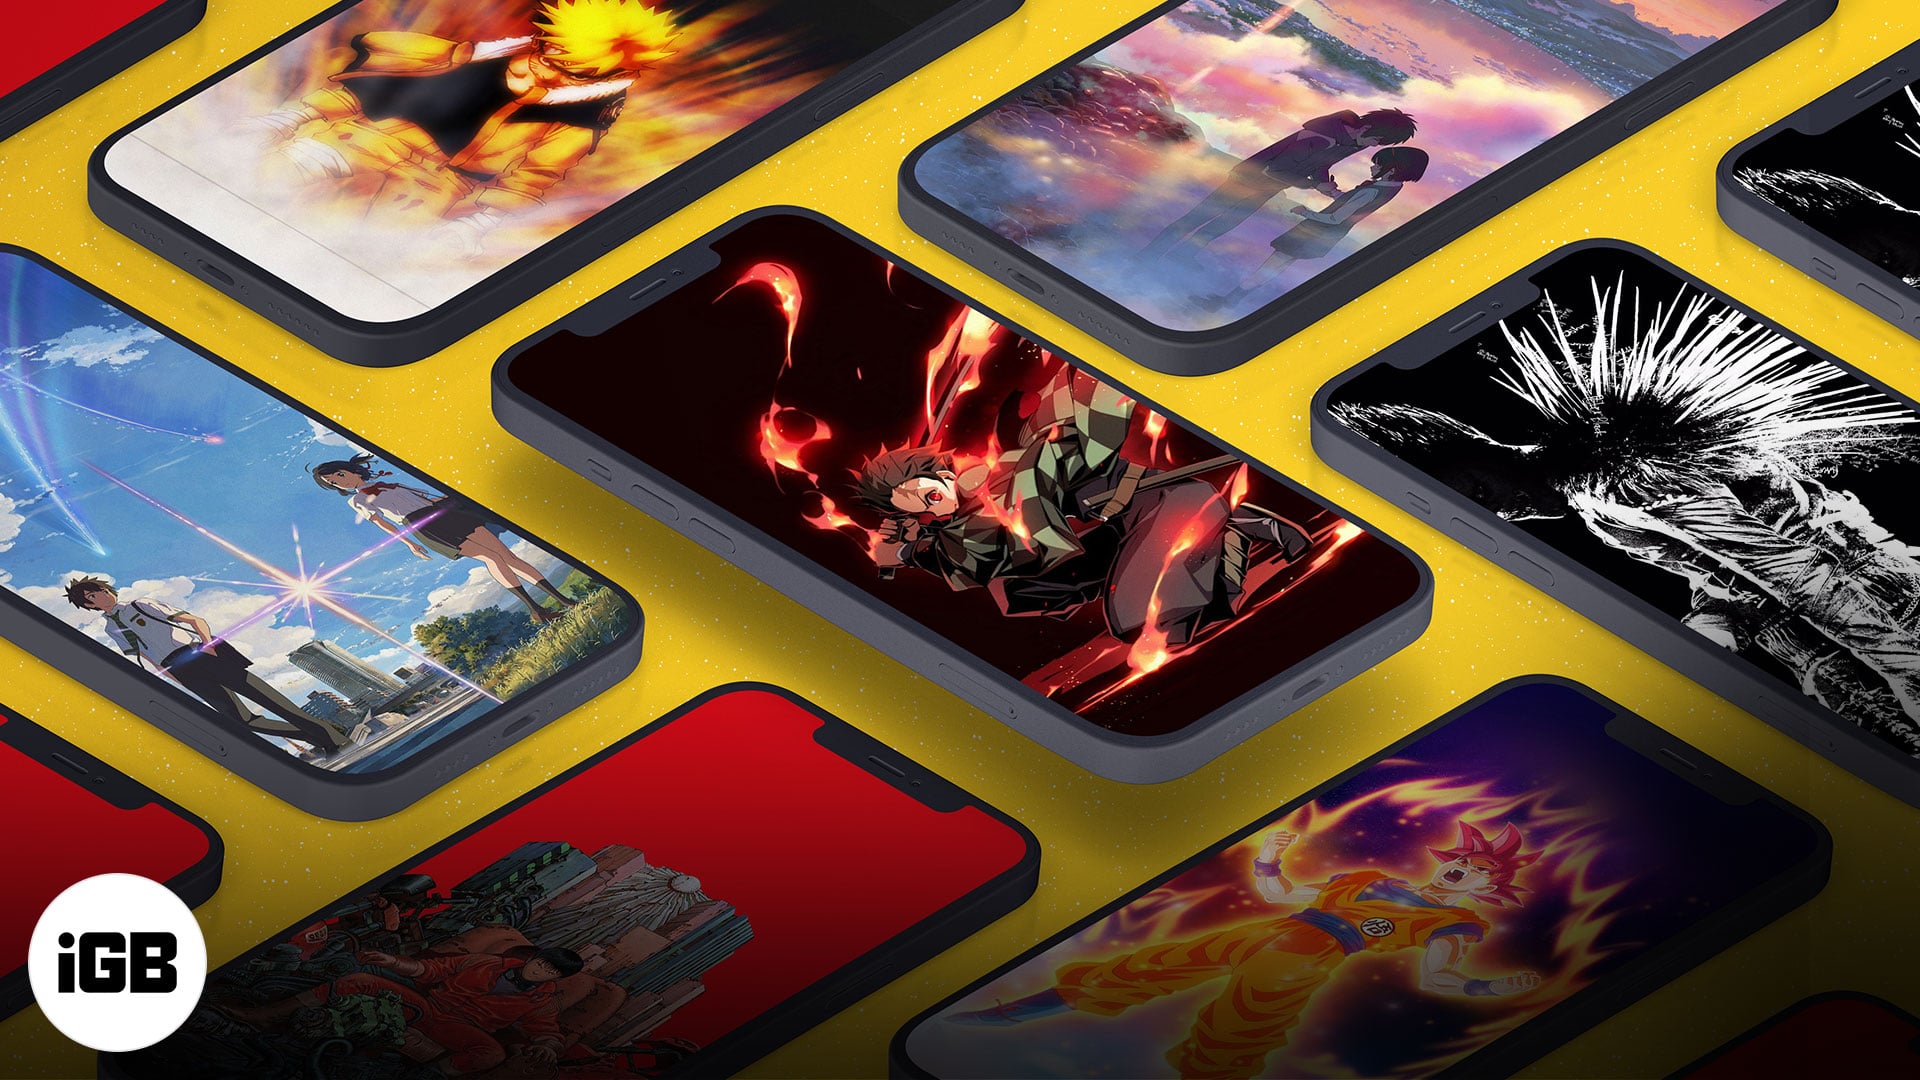 13 Free Anime Wallpapers For Iphone In 22 4k Quality Igeeksblog